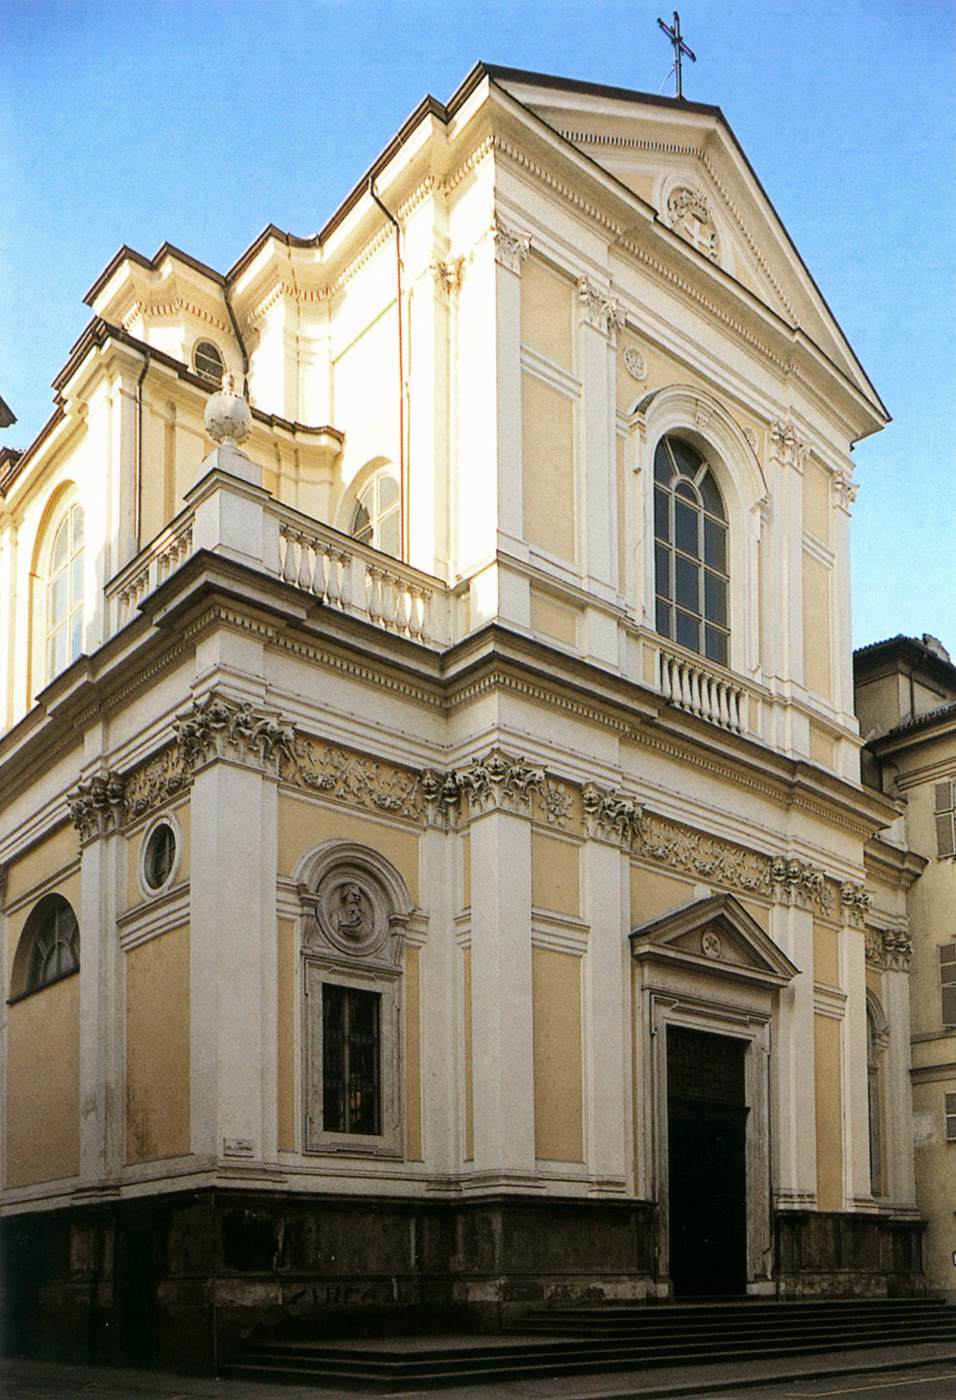 A photograph of The Church of Our Lady of Carmine in Turin, showcasing a beige facade with white columns and decorative details.